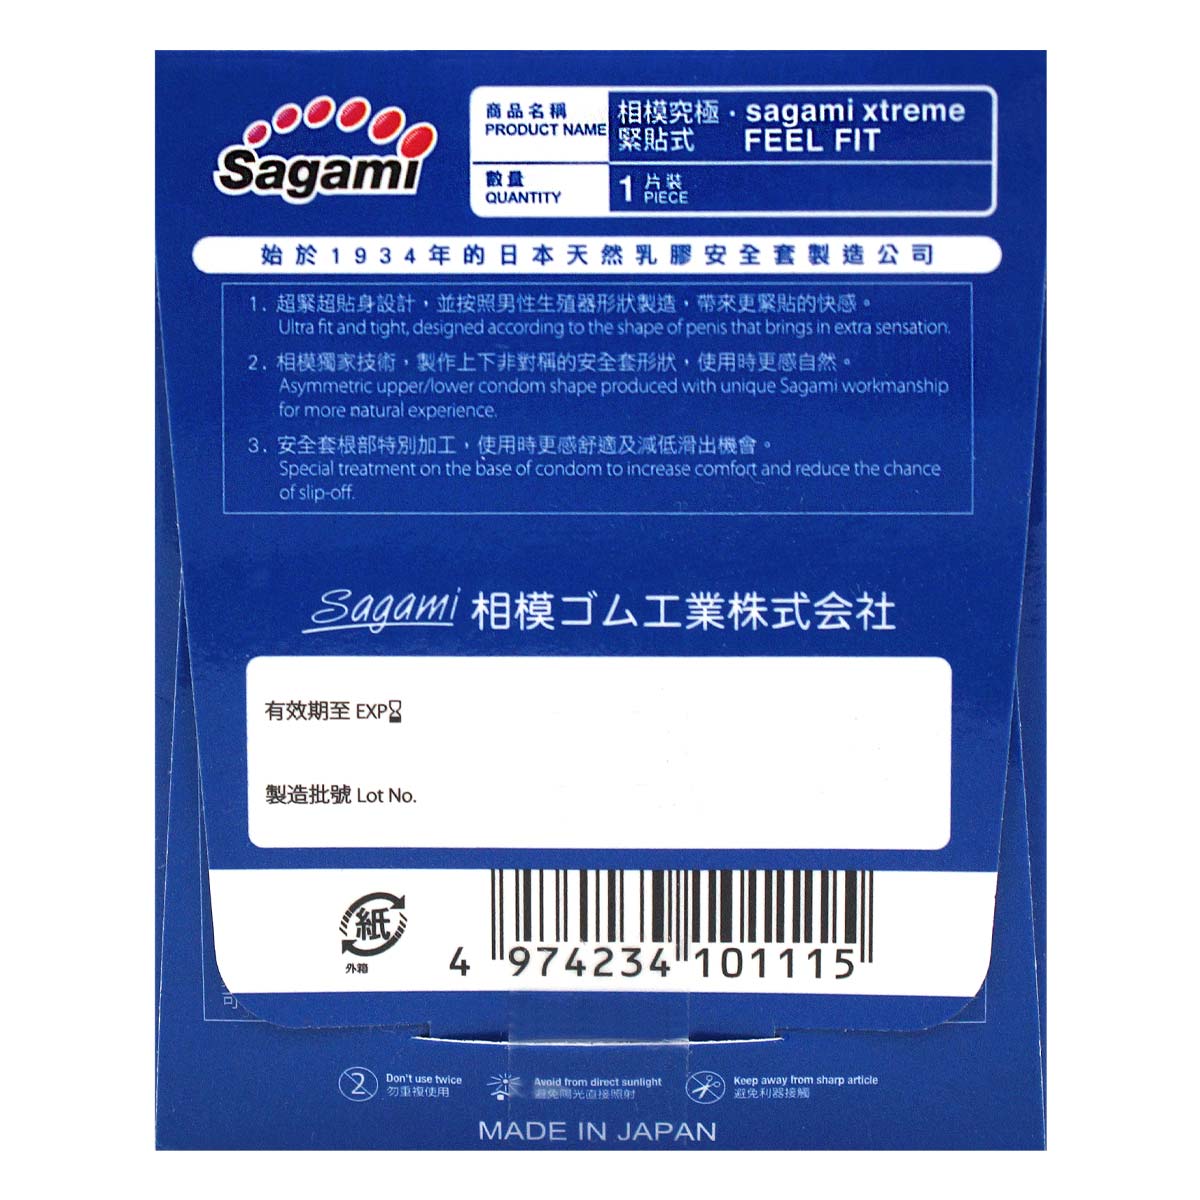 Sagami Xtreme Feel Fit (2nd generation) 51mm 1's Pack Latex Condom-p_3